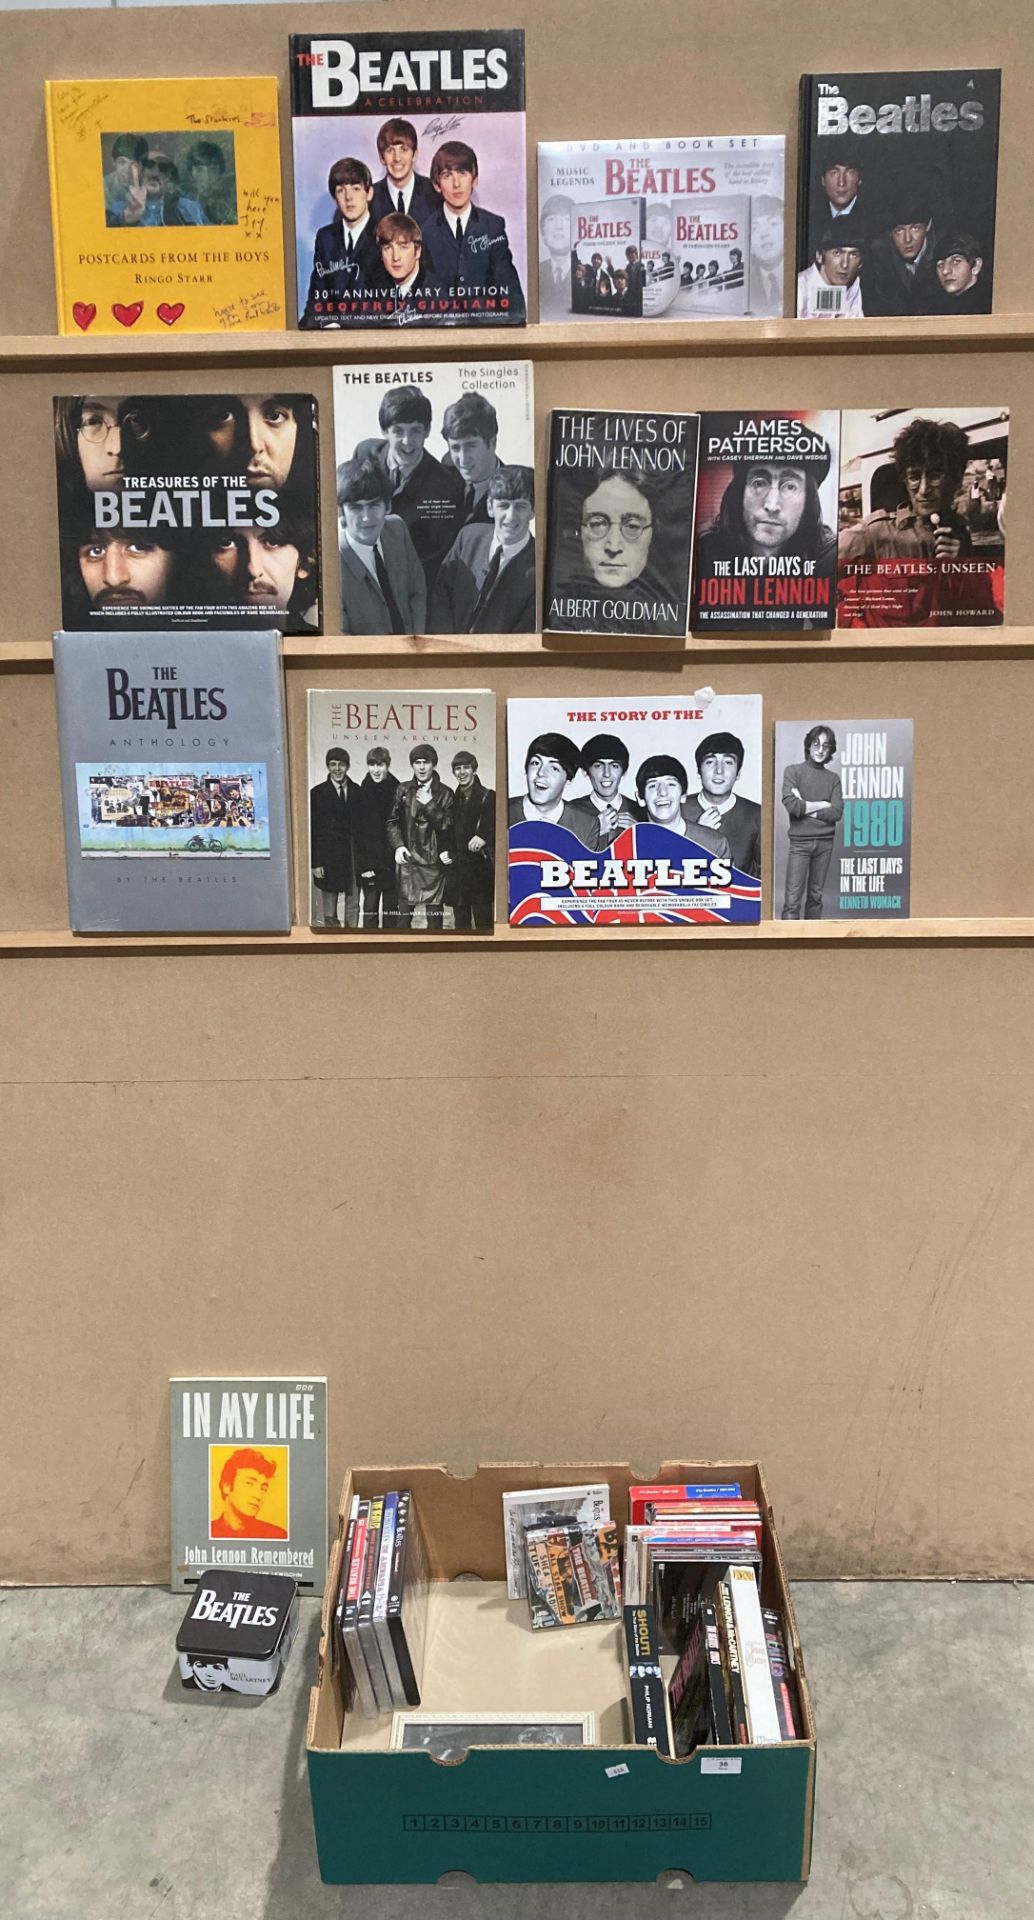 A box containing a number of books relating to The Beatles including The Beatles Anthology,